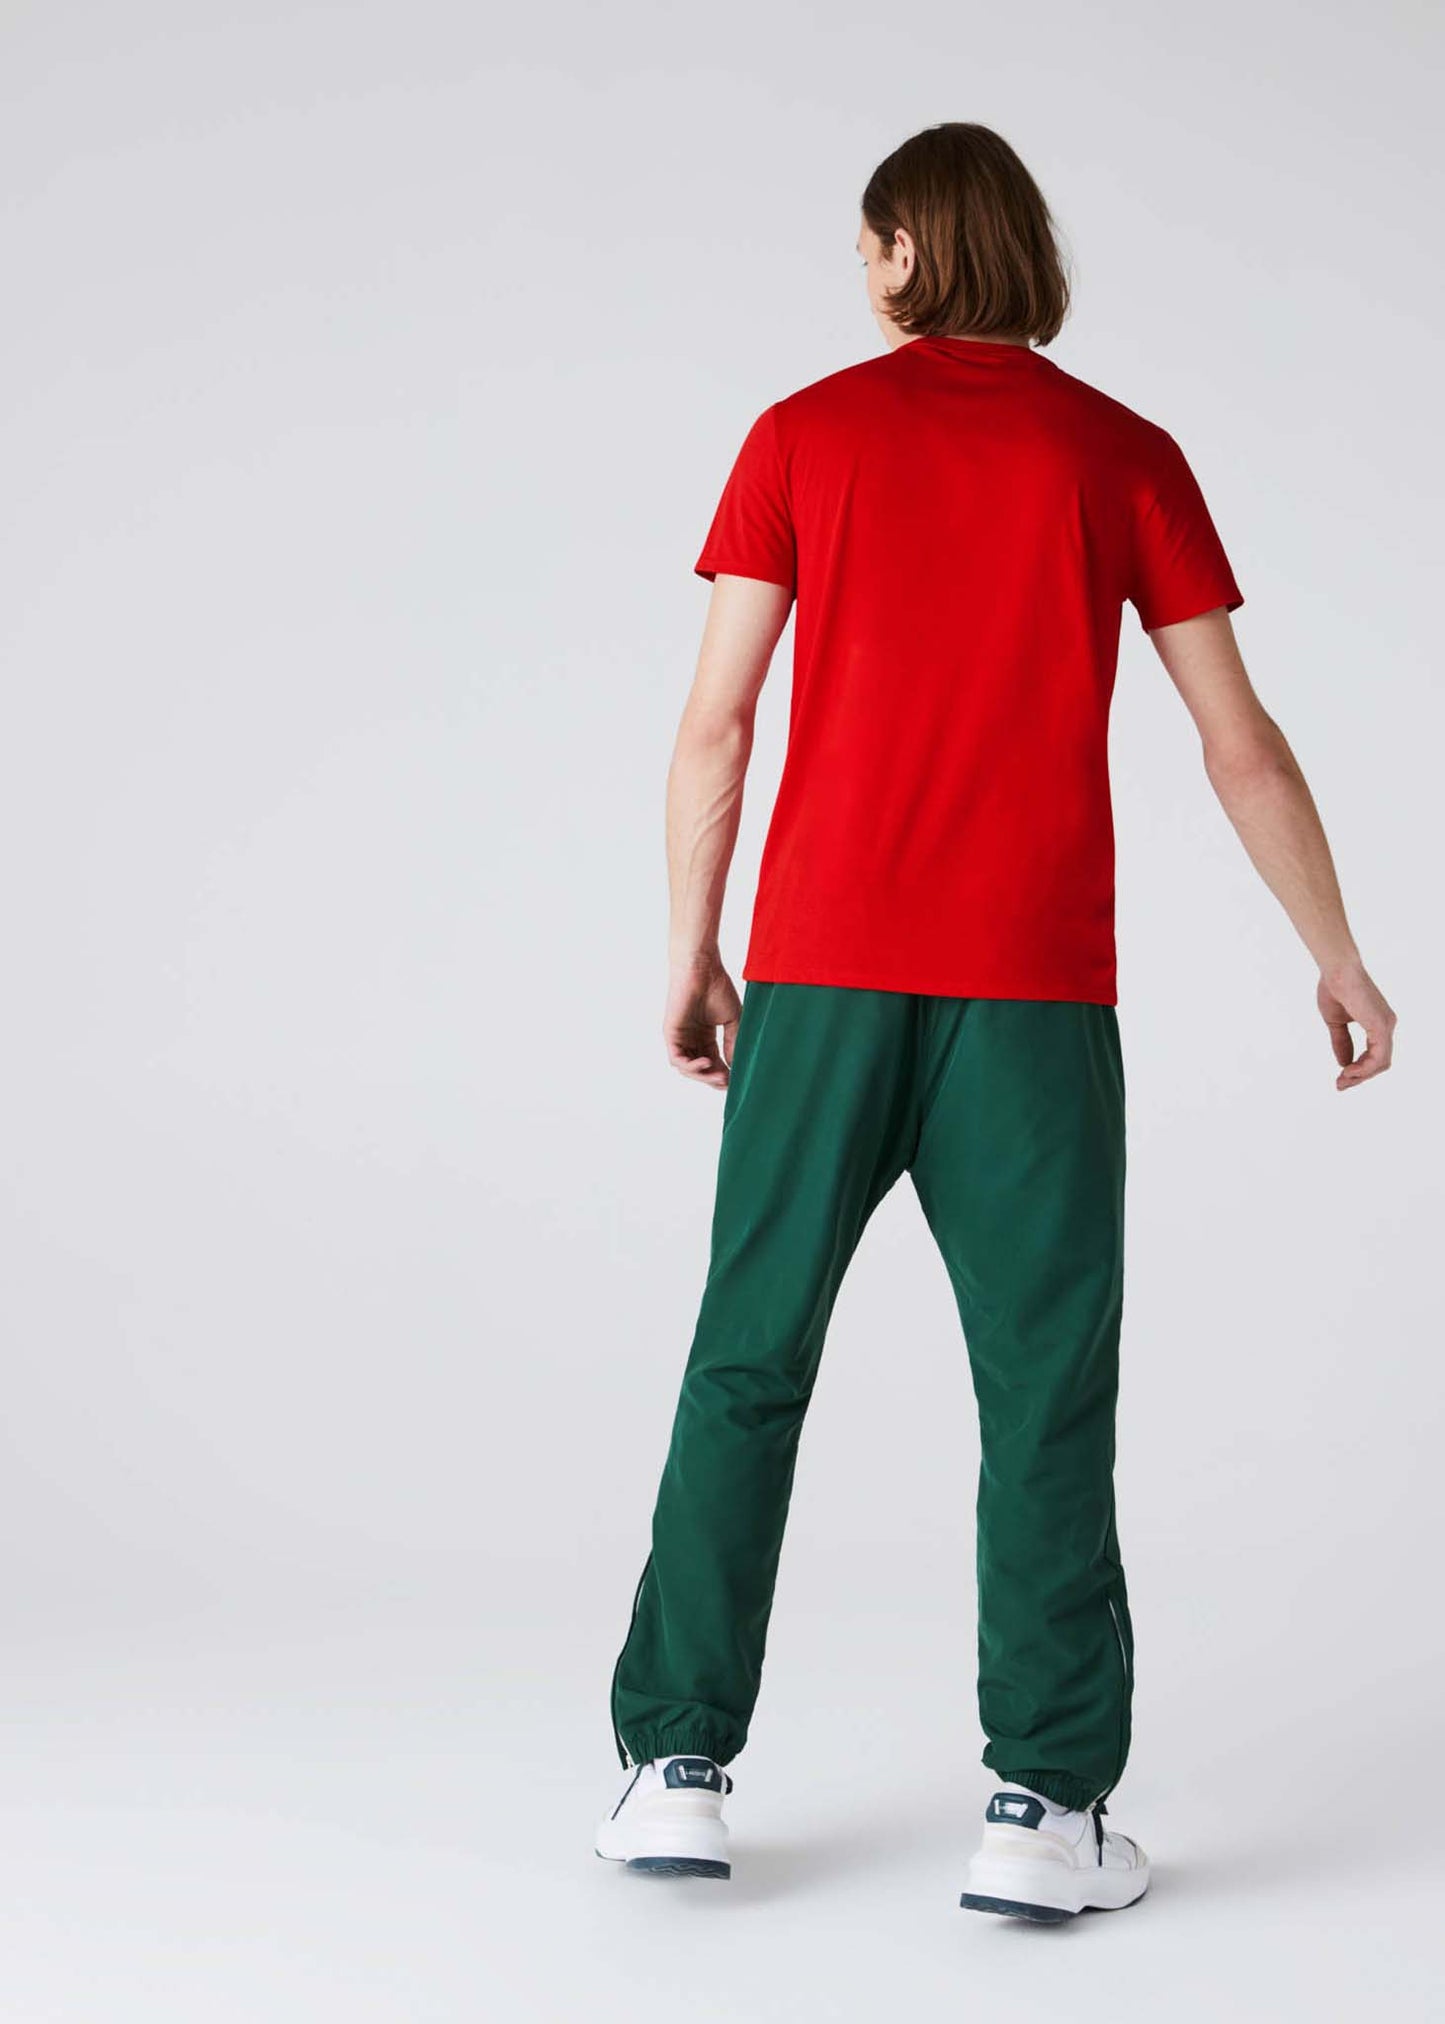 Lacoste t-shirt rood